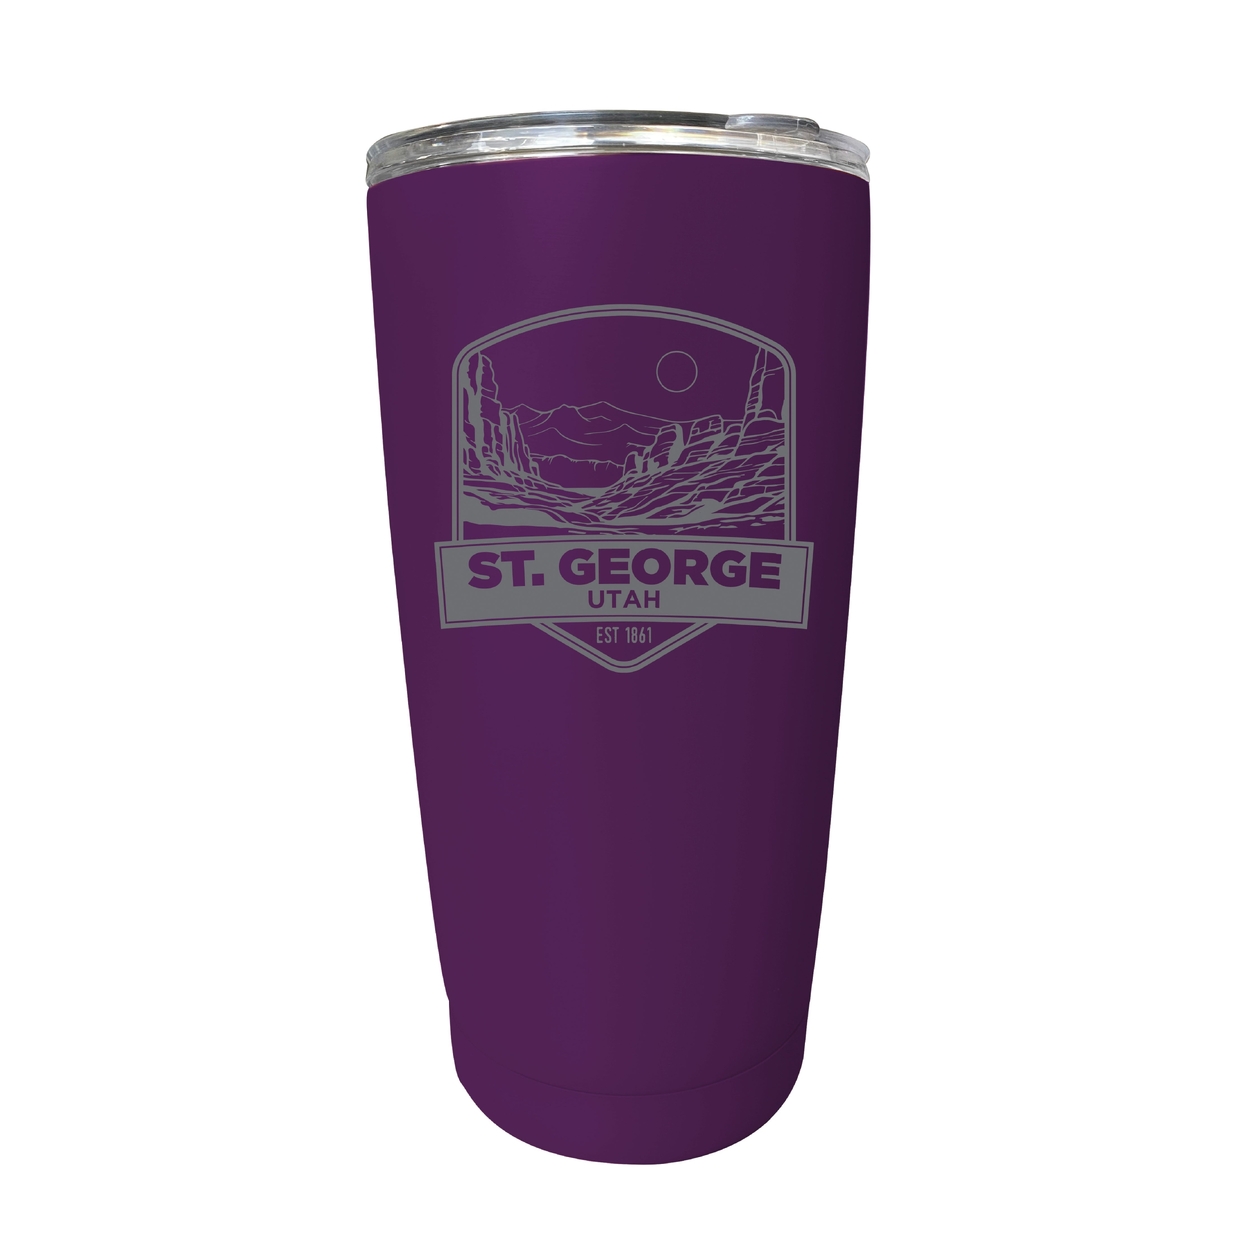 St. George Utah Souvenir 16 Oz Engraved Stainless Steel Insulated Tumbler - Green,,Single Unit